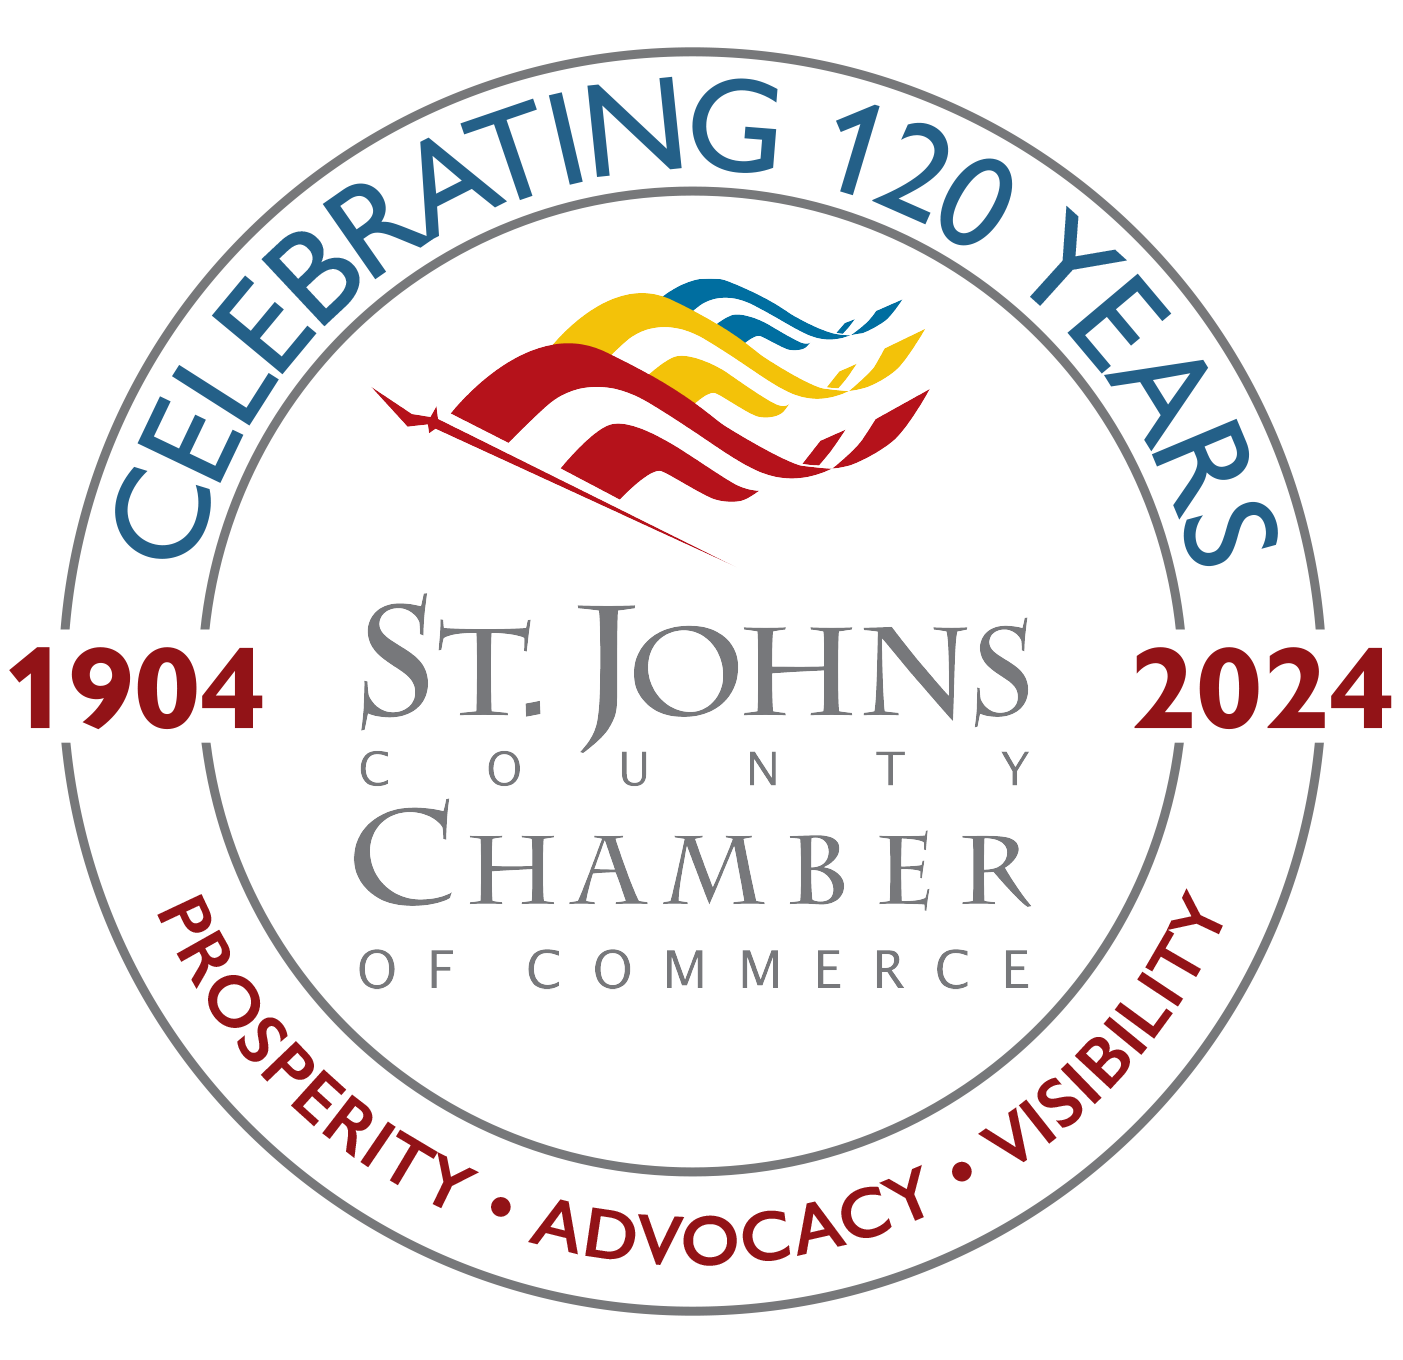 Image for Chamber celebrates 120 years